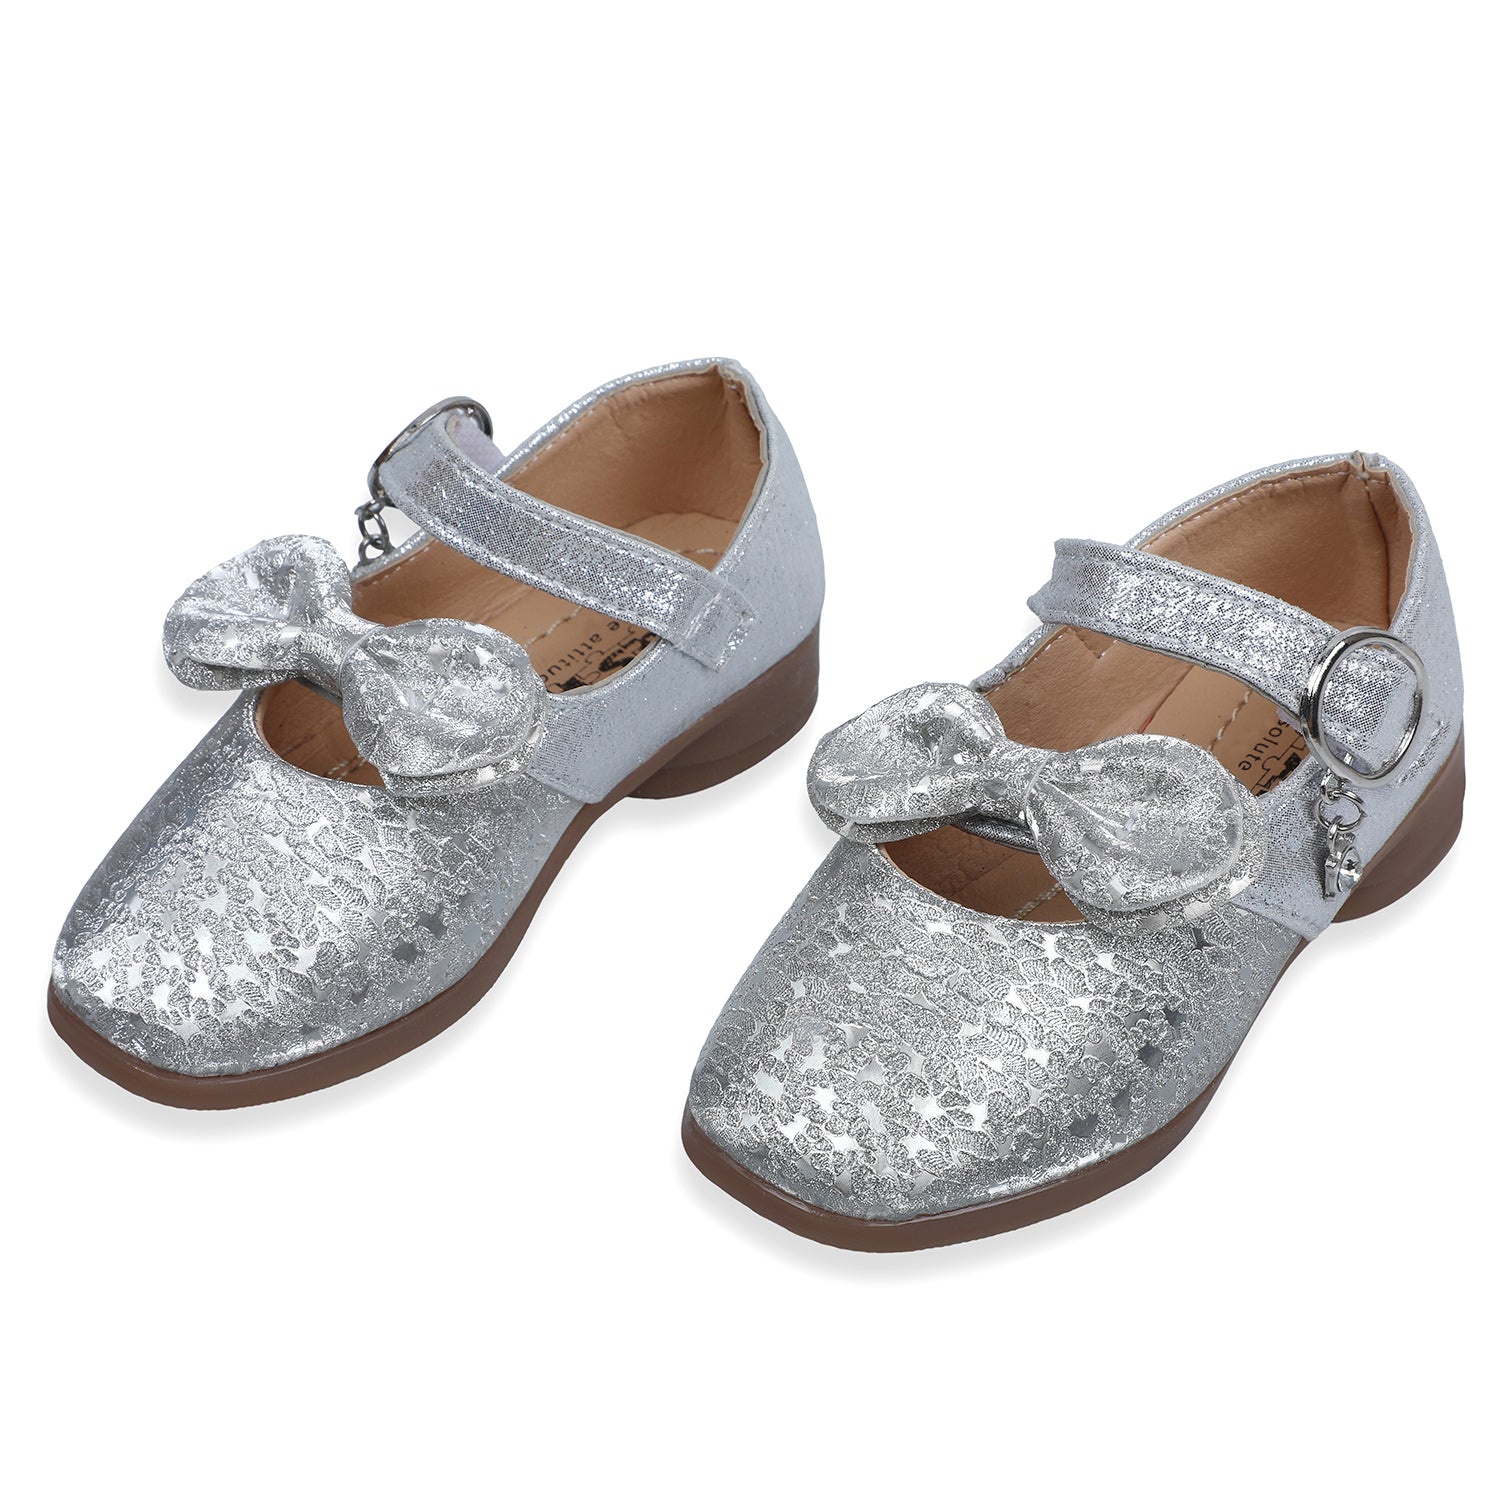 Baby Moo x Bash Kids Bow Applique Embellished Party Ballerinas - Silver